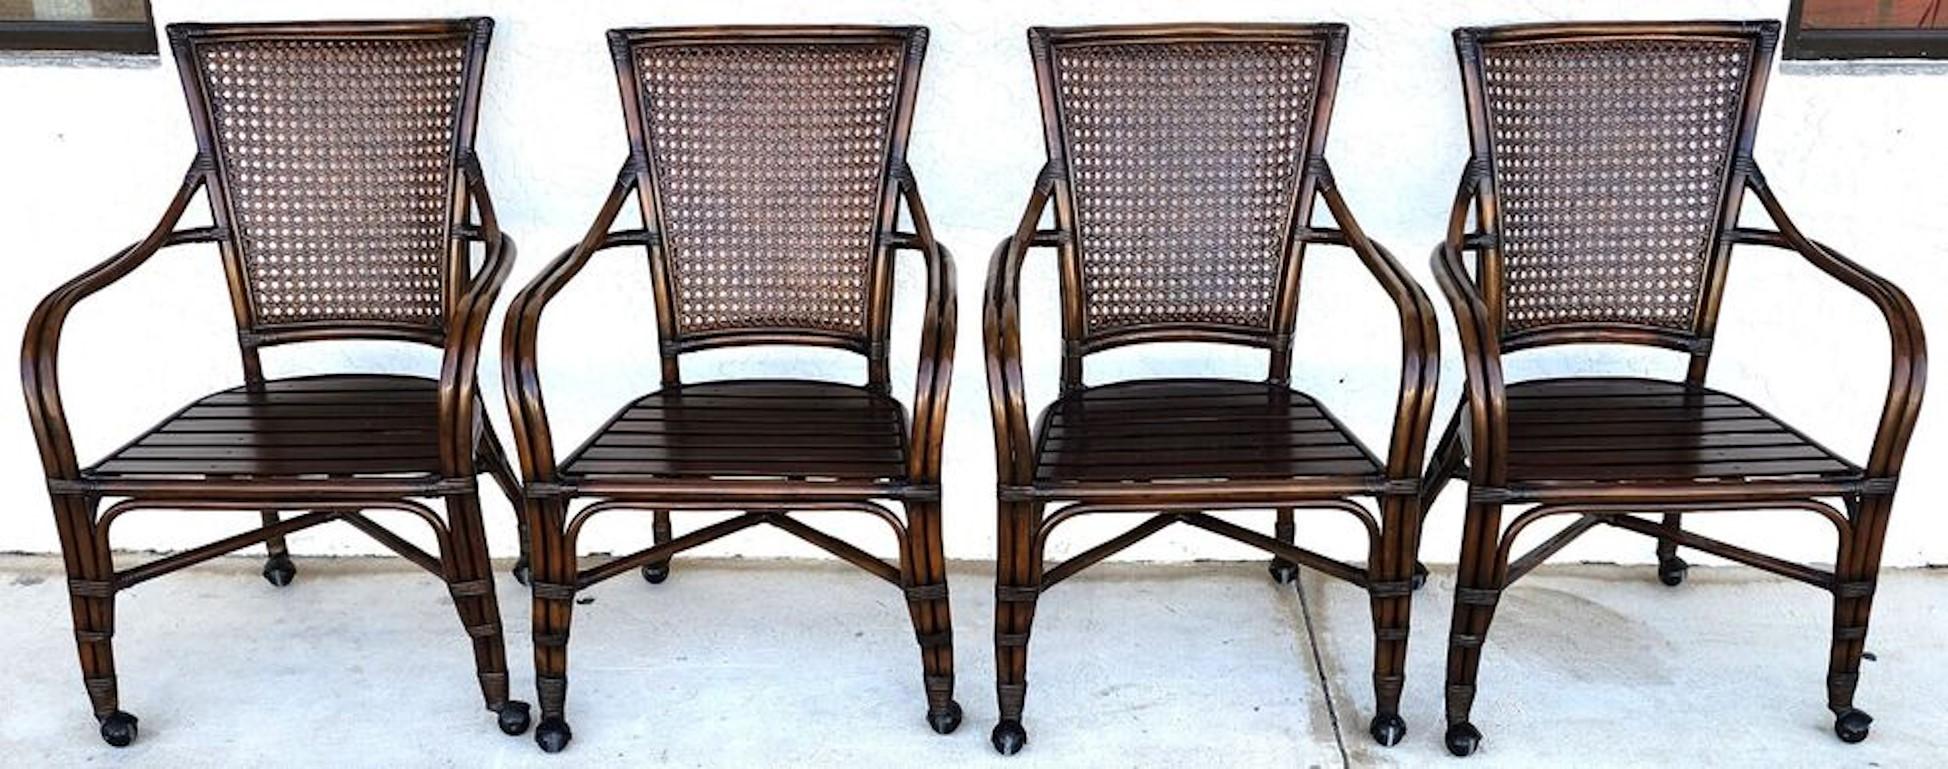 For FULL item description click on CONTINUE READING at the bottom of this page.

Offering One Of Our Recent Palm Beach Estate Fine Furniture Acquisitions Of A
Set of 4 Caned Back & Rolling Bamboo Dining Chairs
These are very well made and sturdy